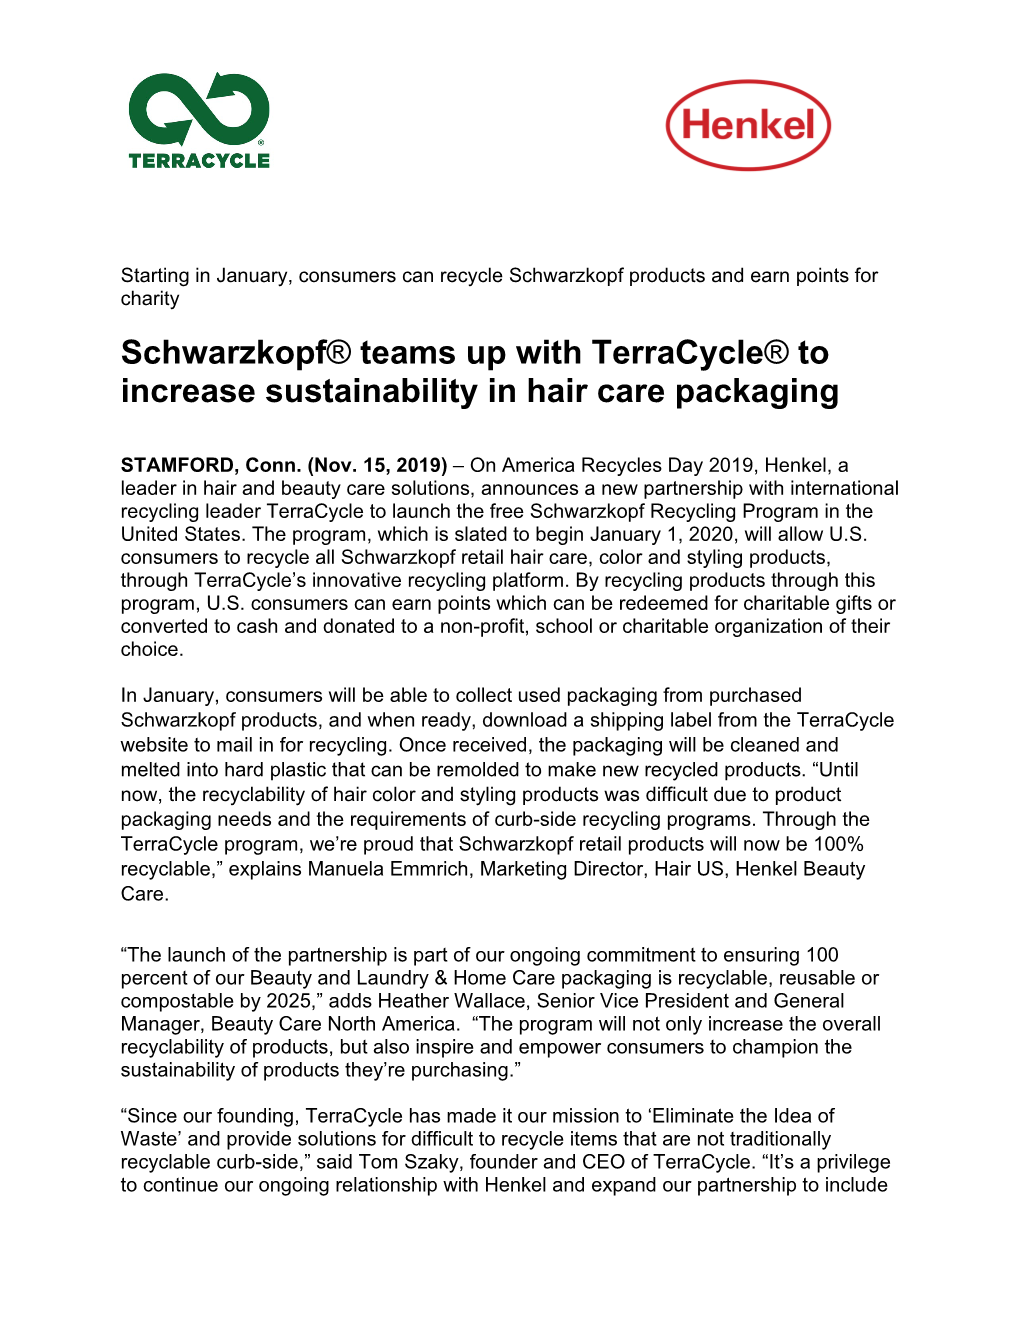 Schwarzkopf® Teams up with Terracycle® to Increase Sustainability in Hair Care Packaging